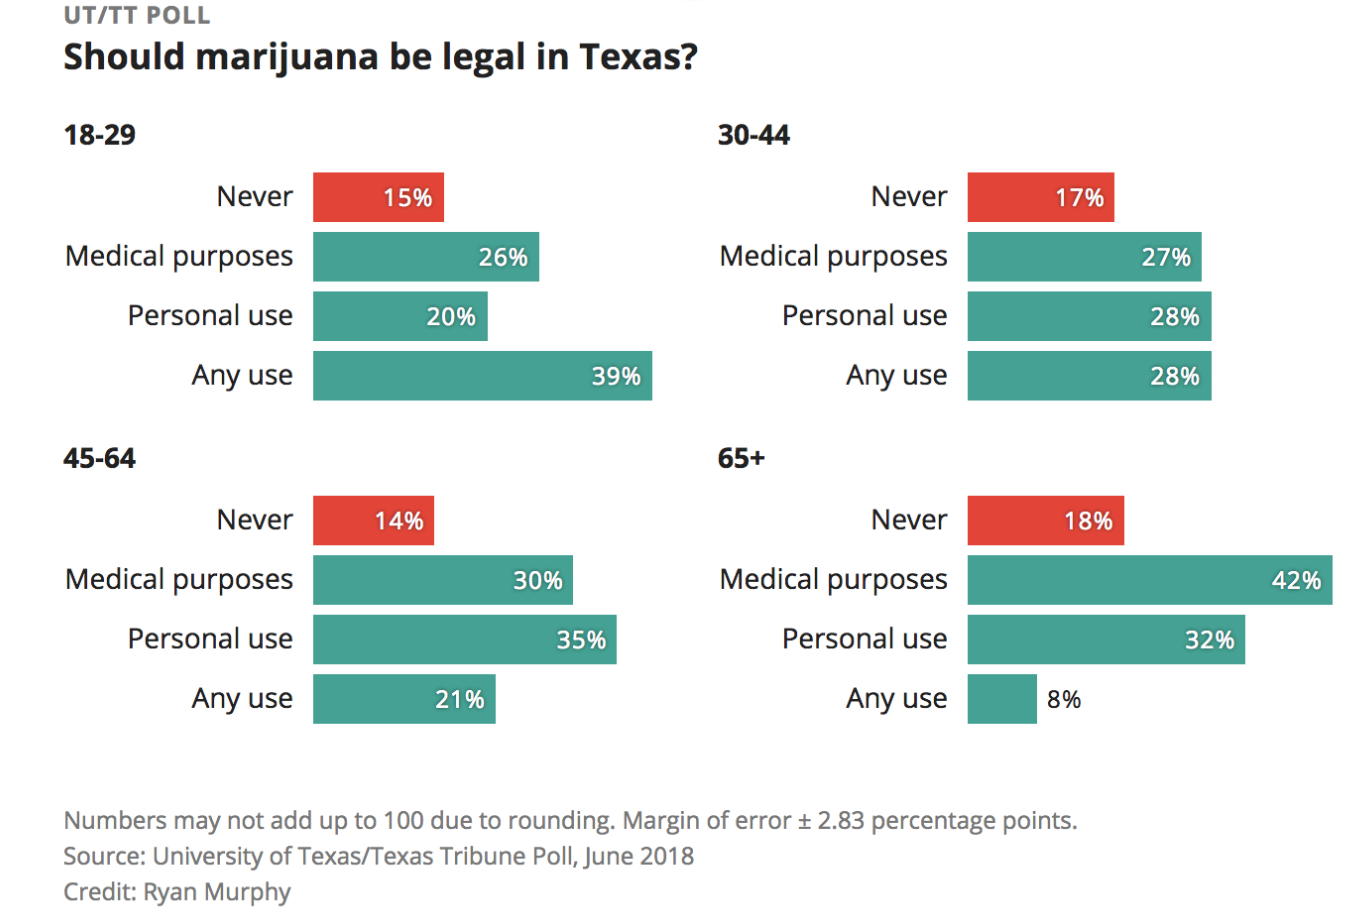 A bar graph broken down by age ranges showing results of a UT/TT poll asking Texans, if they agreed with legalizing marijuana never, for medical purposes, for personal use, or for any use.